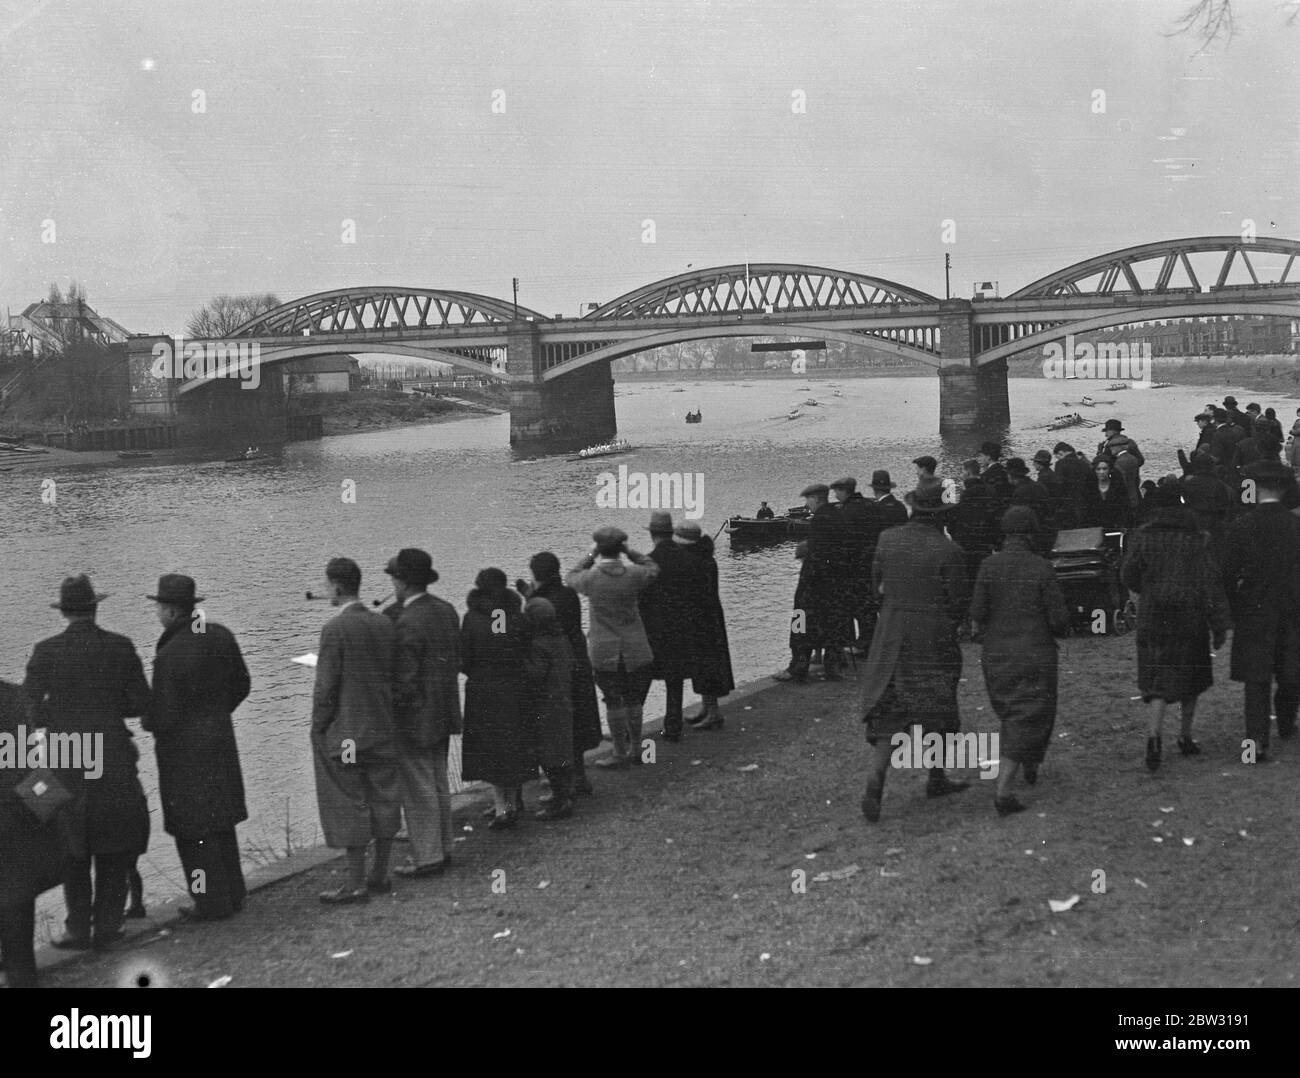 Head of the river championships over boat race course on Thames . 131 crews and over a thousand oarsmen took pat in the head of the river championships on the reverse boat race course from Mortlake to Putney on the Thames . A view of the head of the river championships in progress from Barnes Bridge . 18 March 1932 Stock Photo